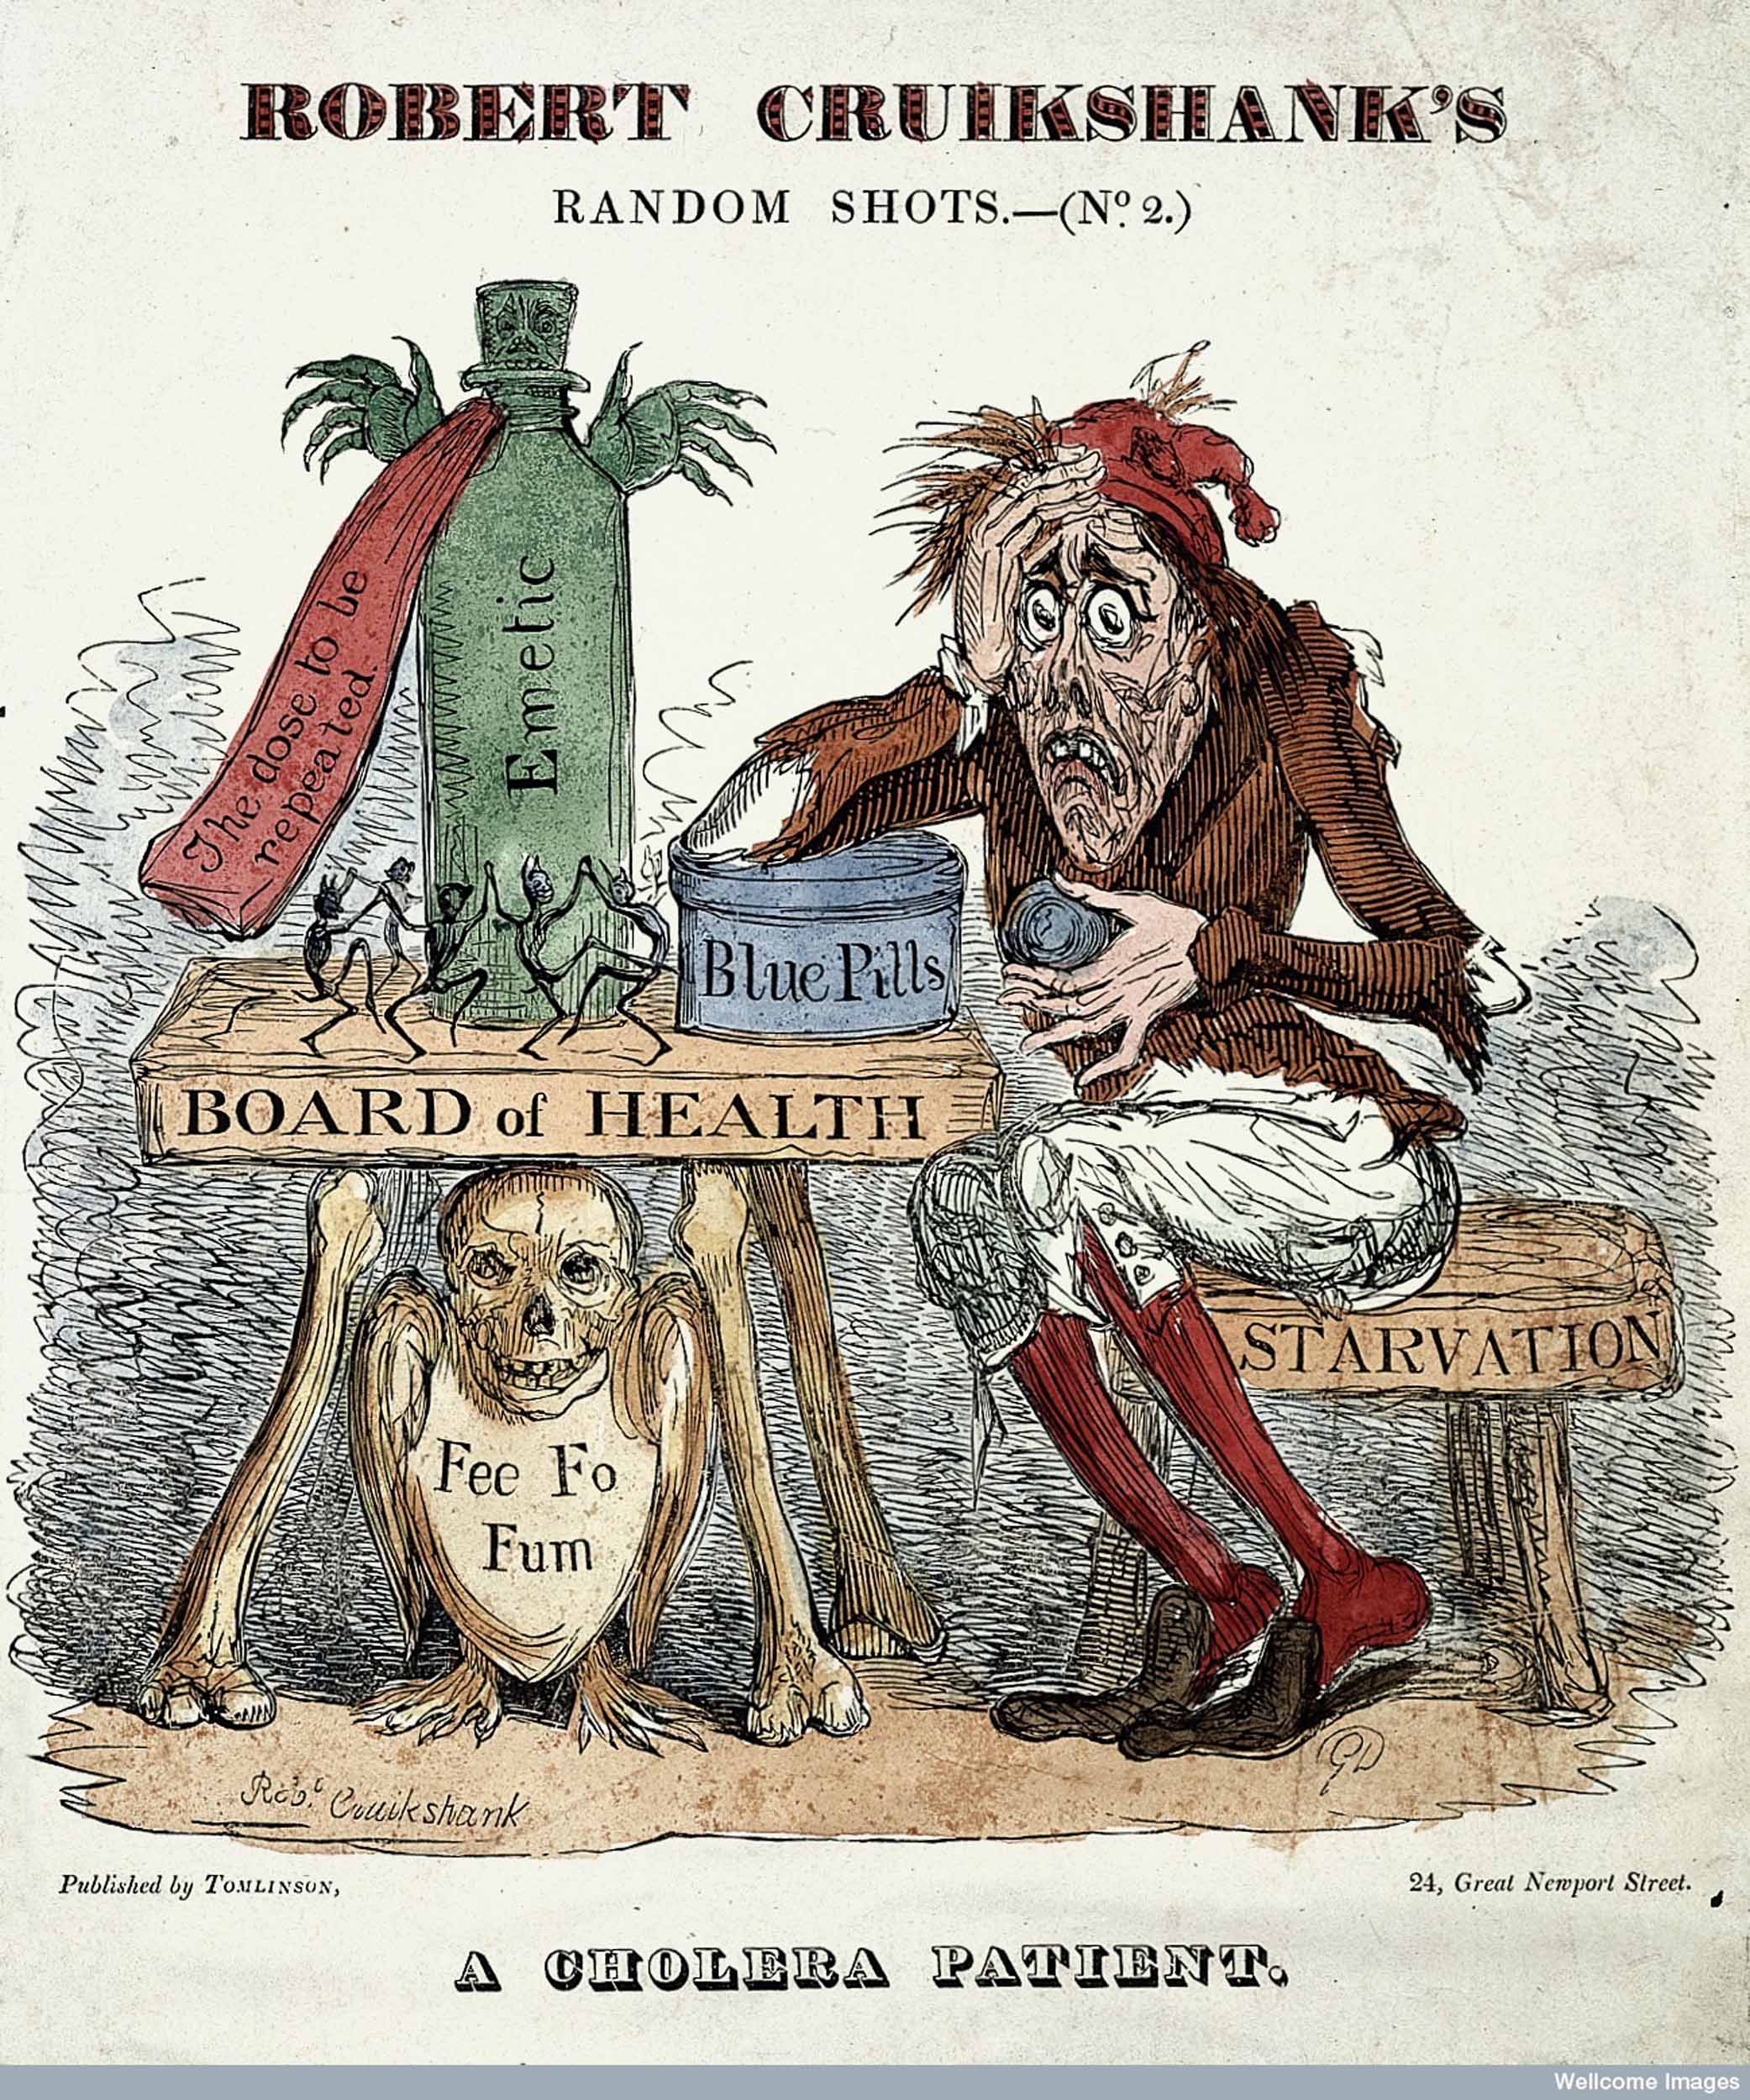 A cholera patient, by Robert Cruikshank. Copyright Wellcome Library, London. Creative Commons Attribution 4.0 International (https://creativecommons.org/licenses/by/4.0/).